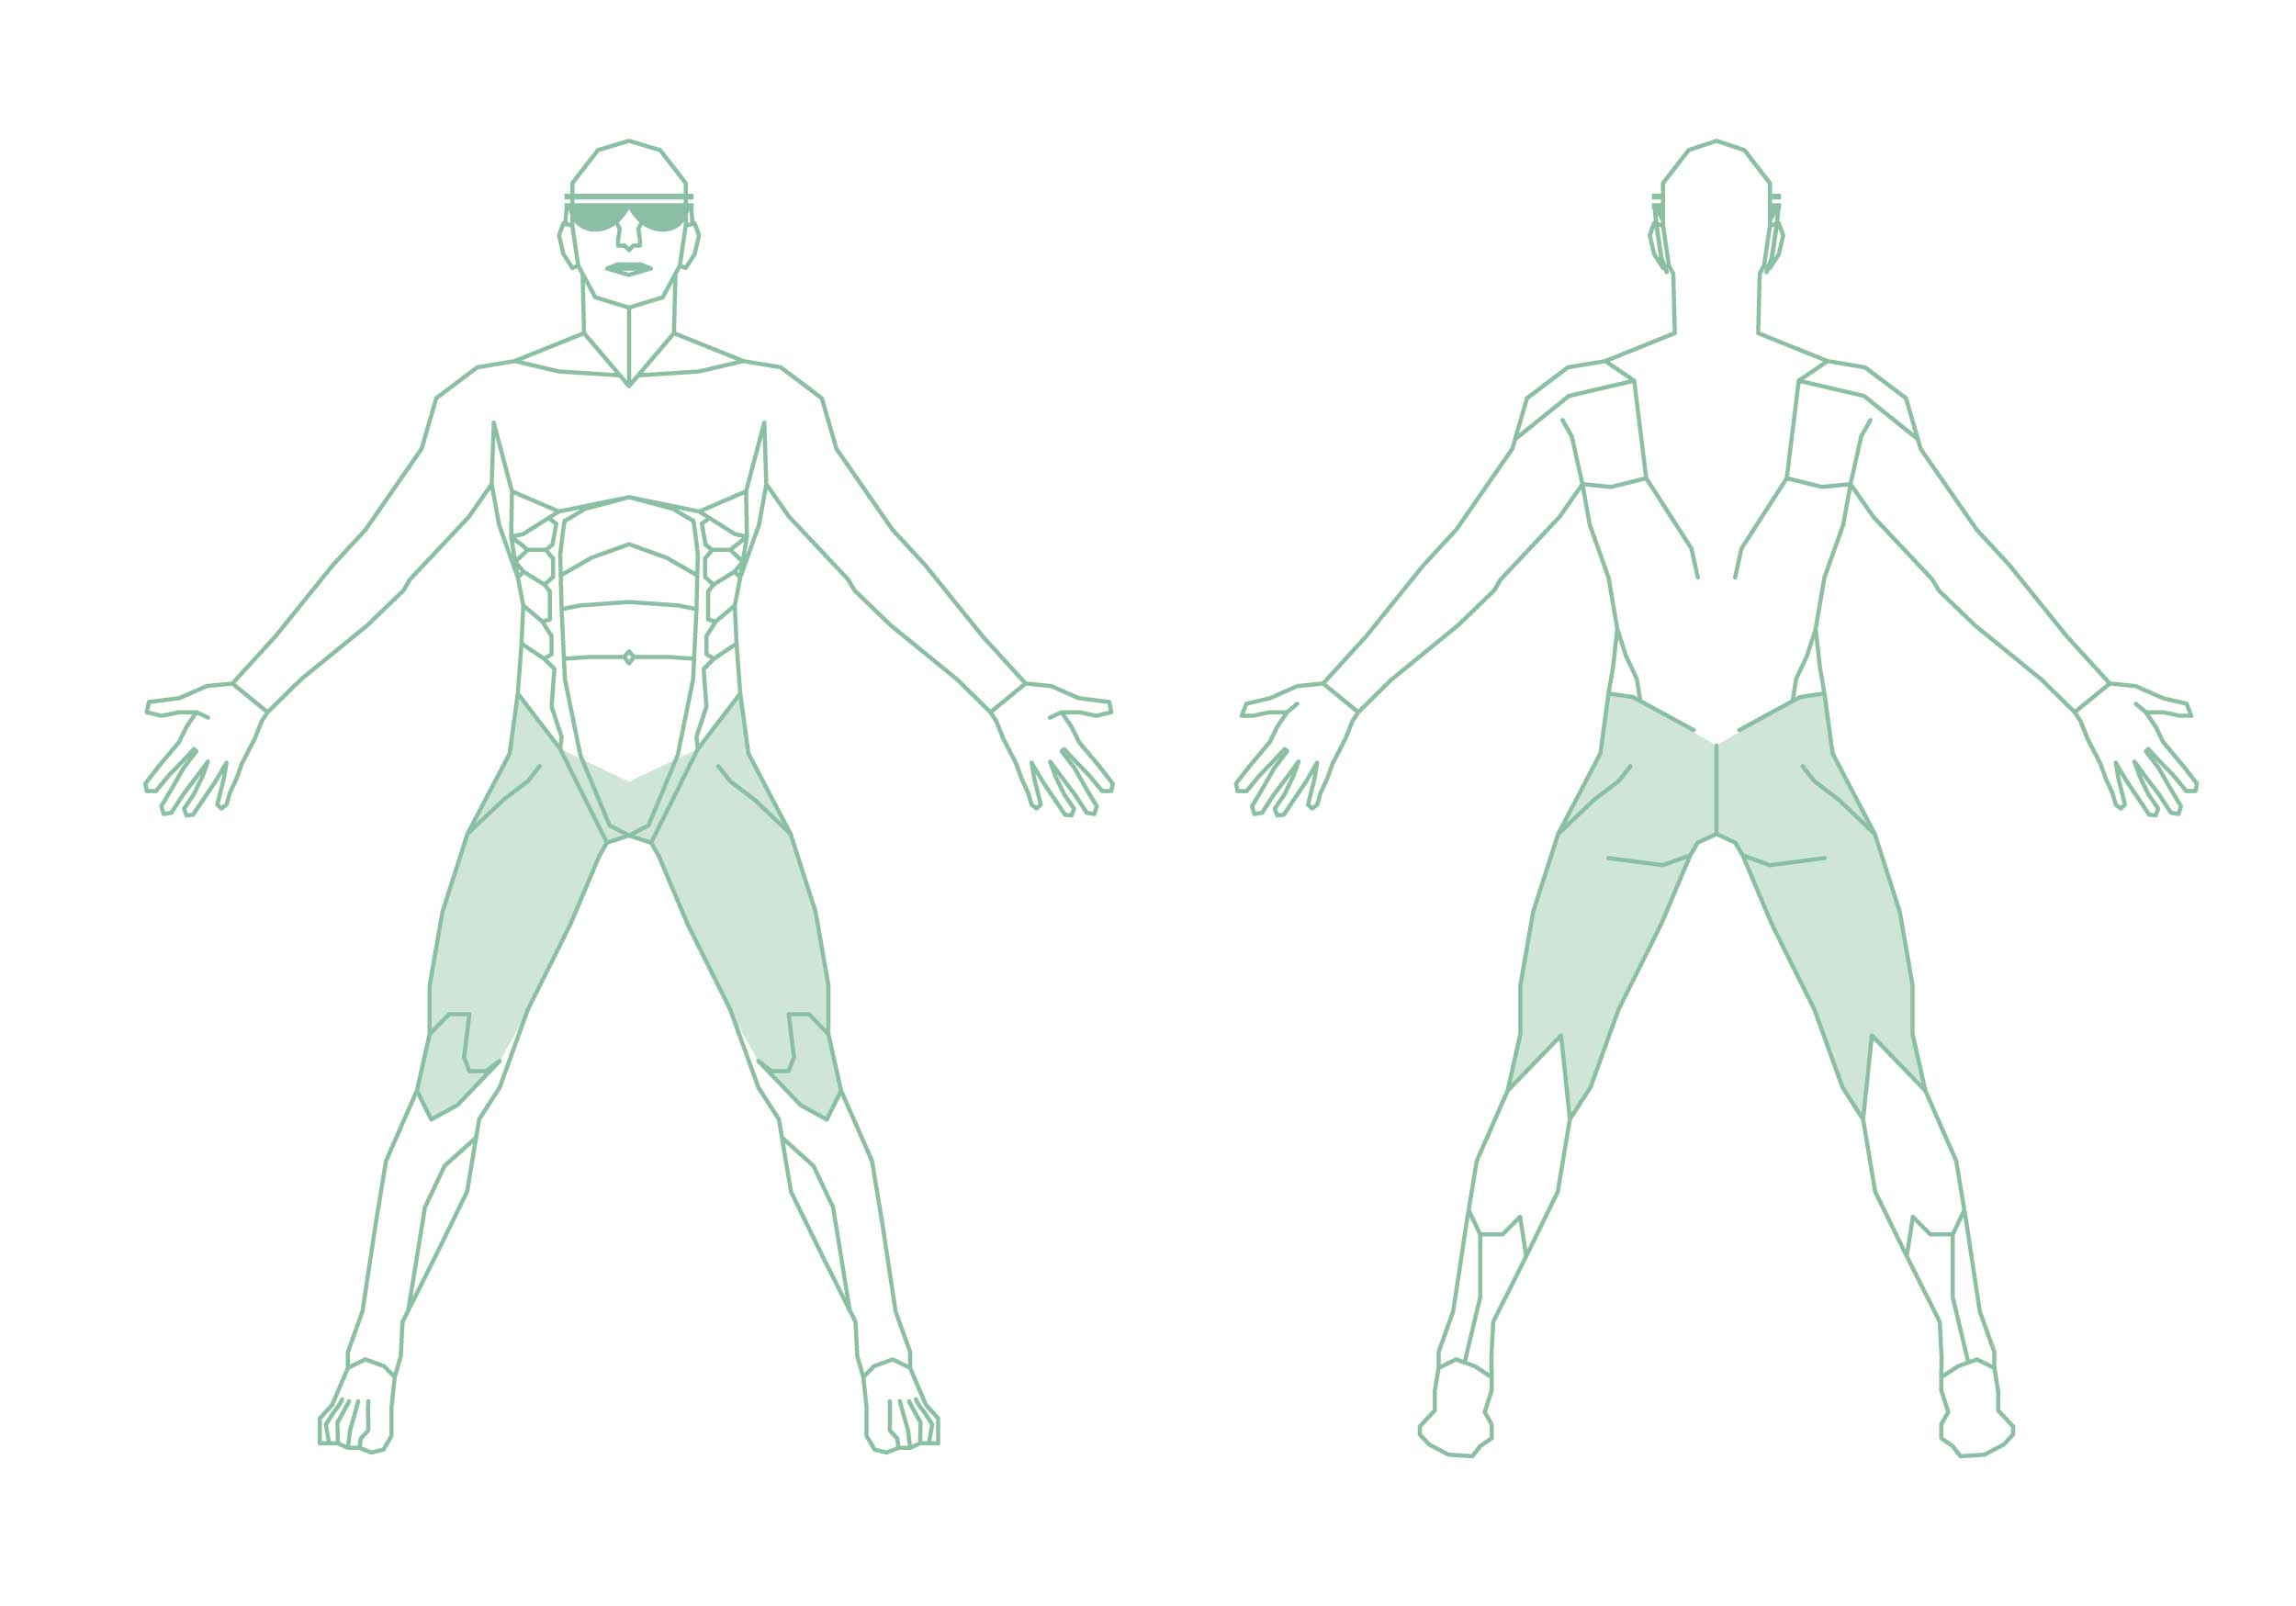 Illustration of a person with the visibly delimited body regions of the hips, knees and thighs